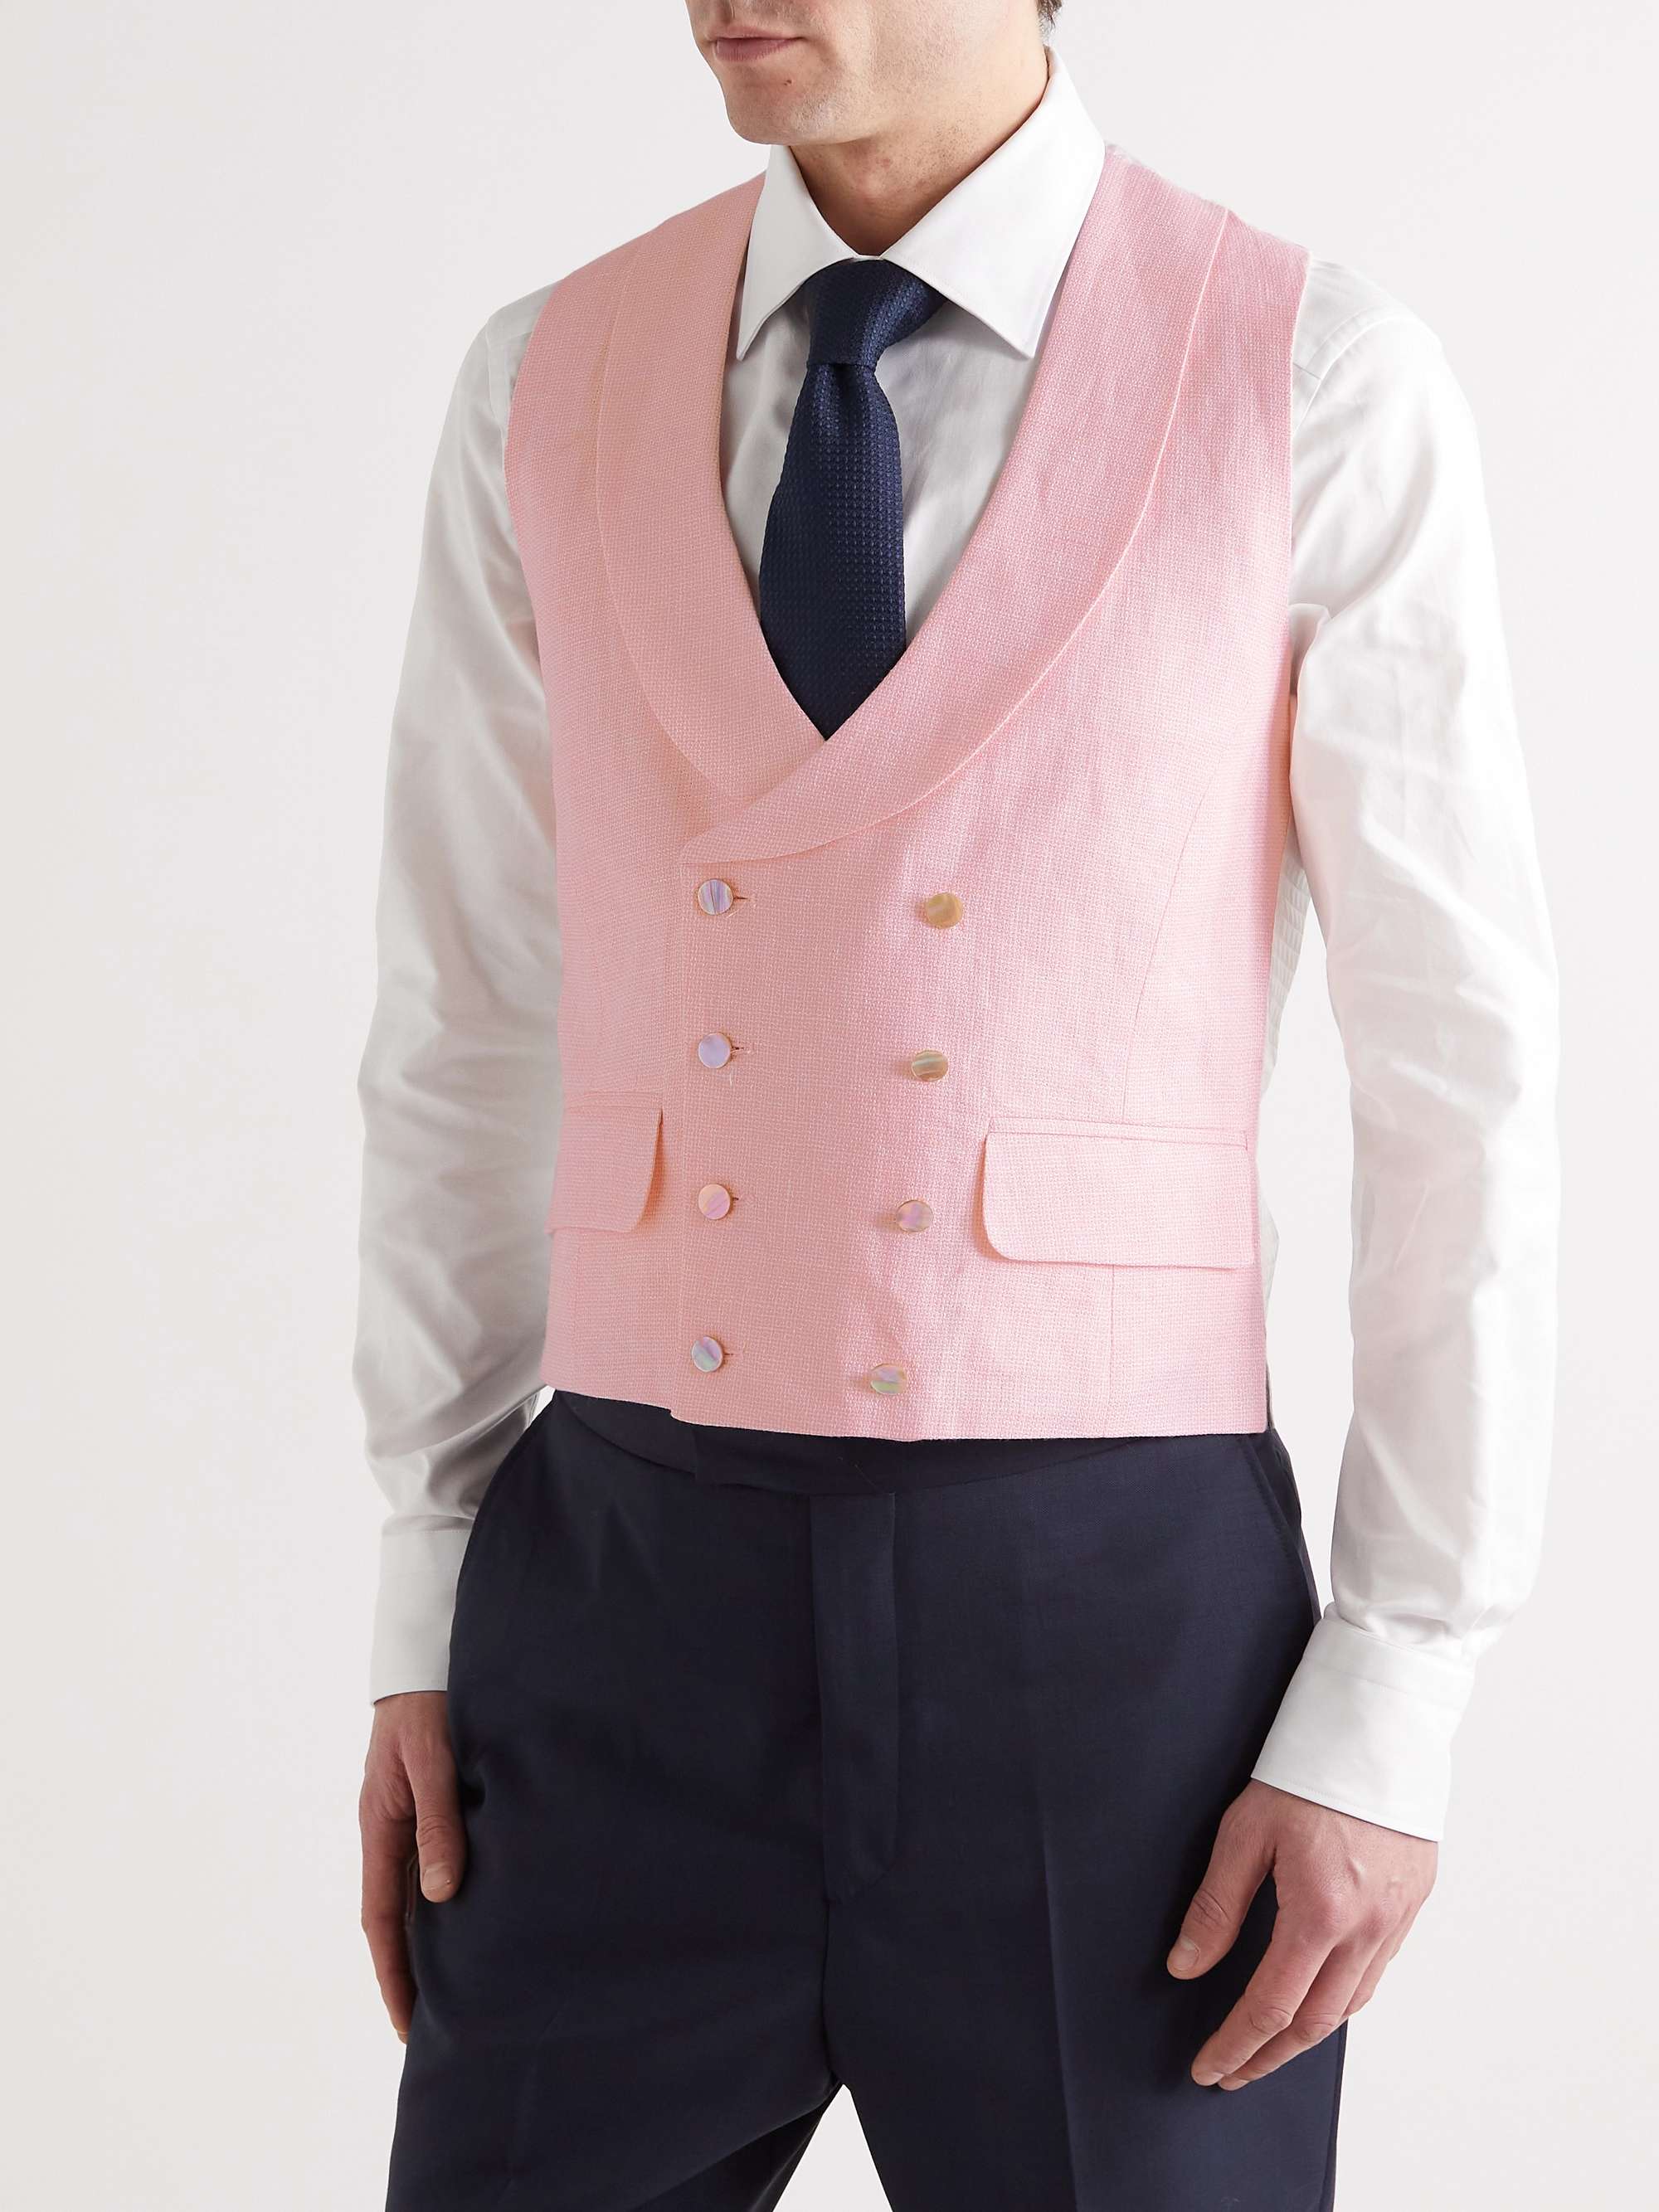 FAVOURBROOK Slim-Fit Double-Breasted Wool Waistcoat